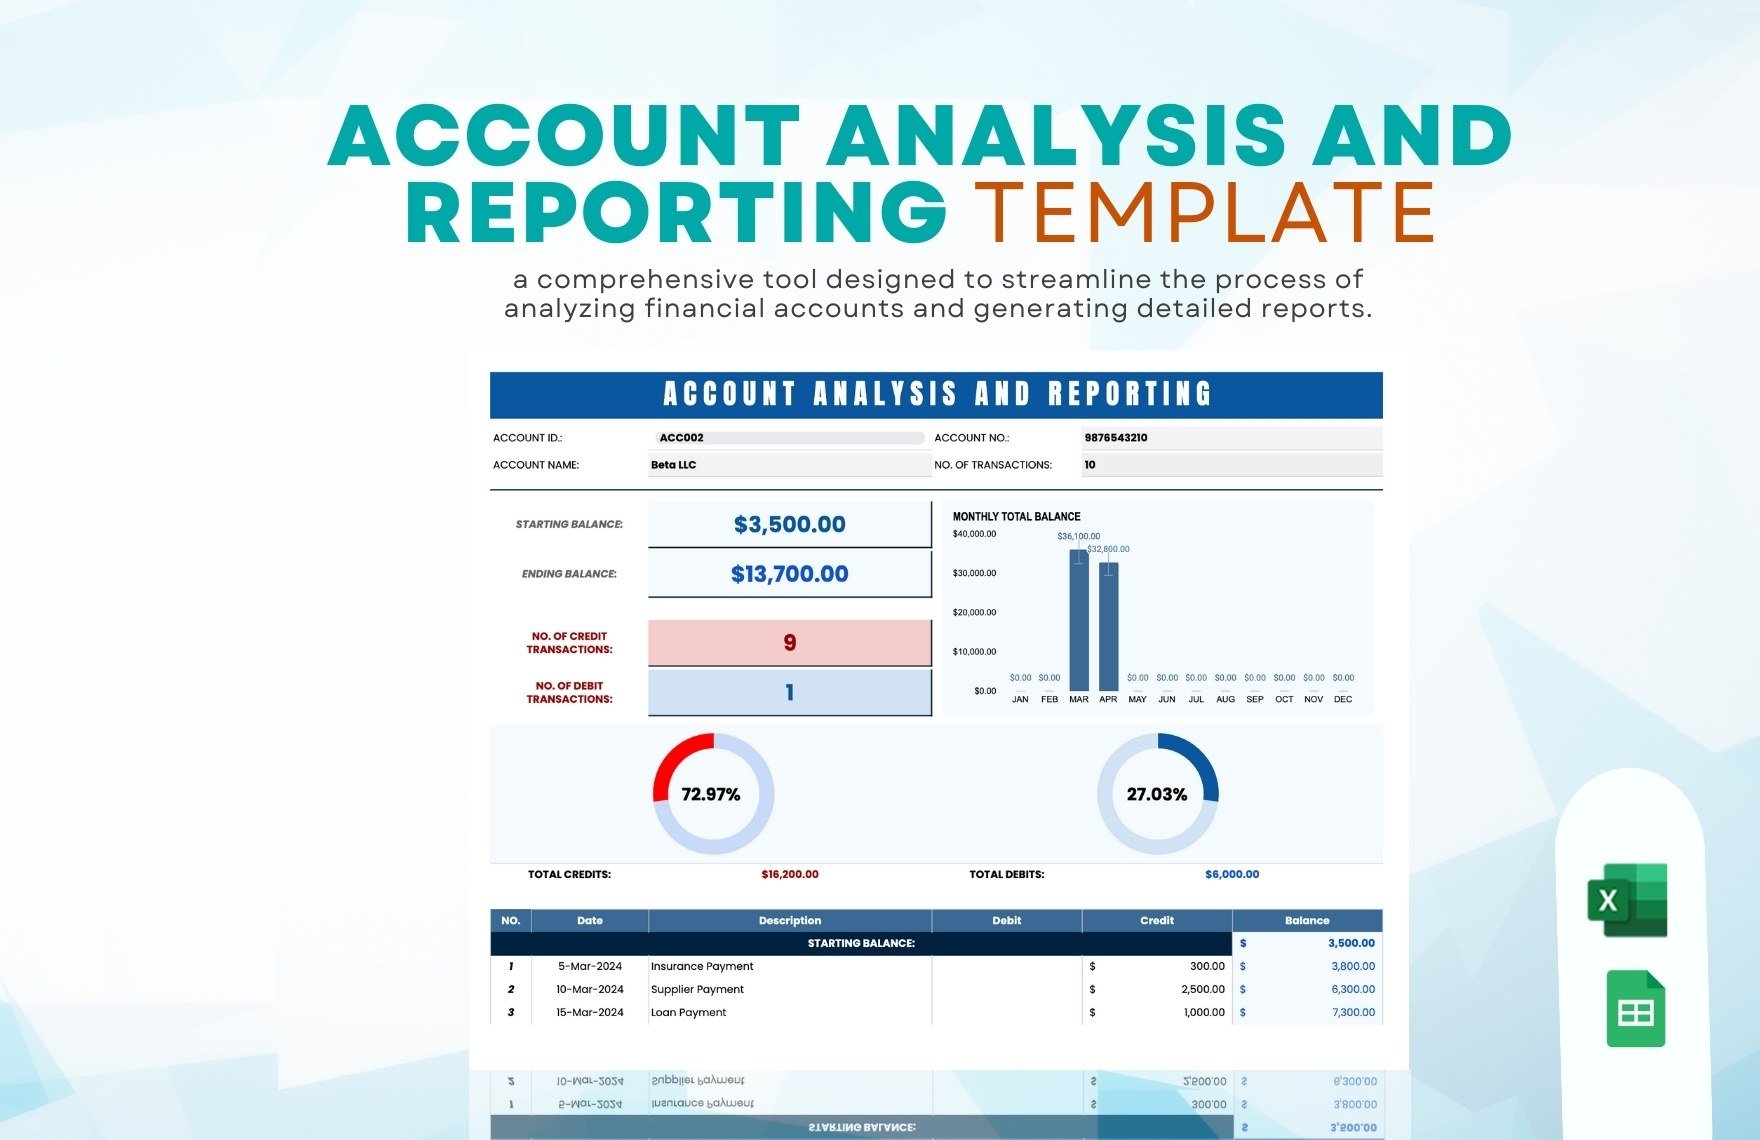 Account Analysis and Reporting Template